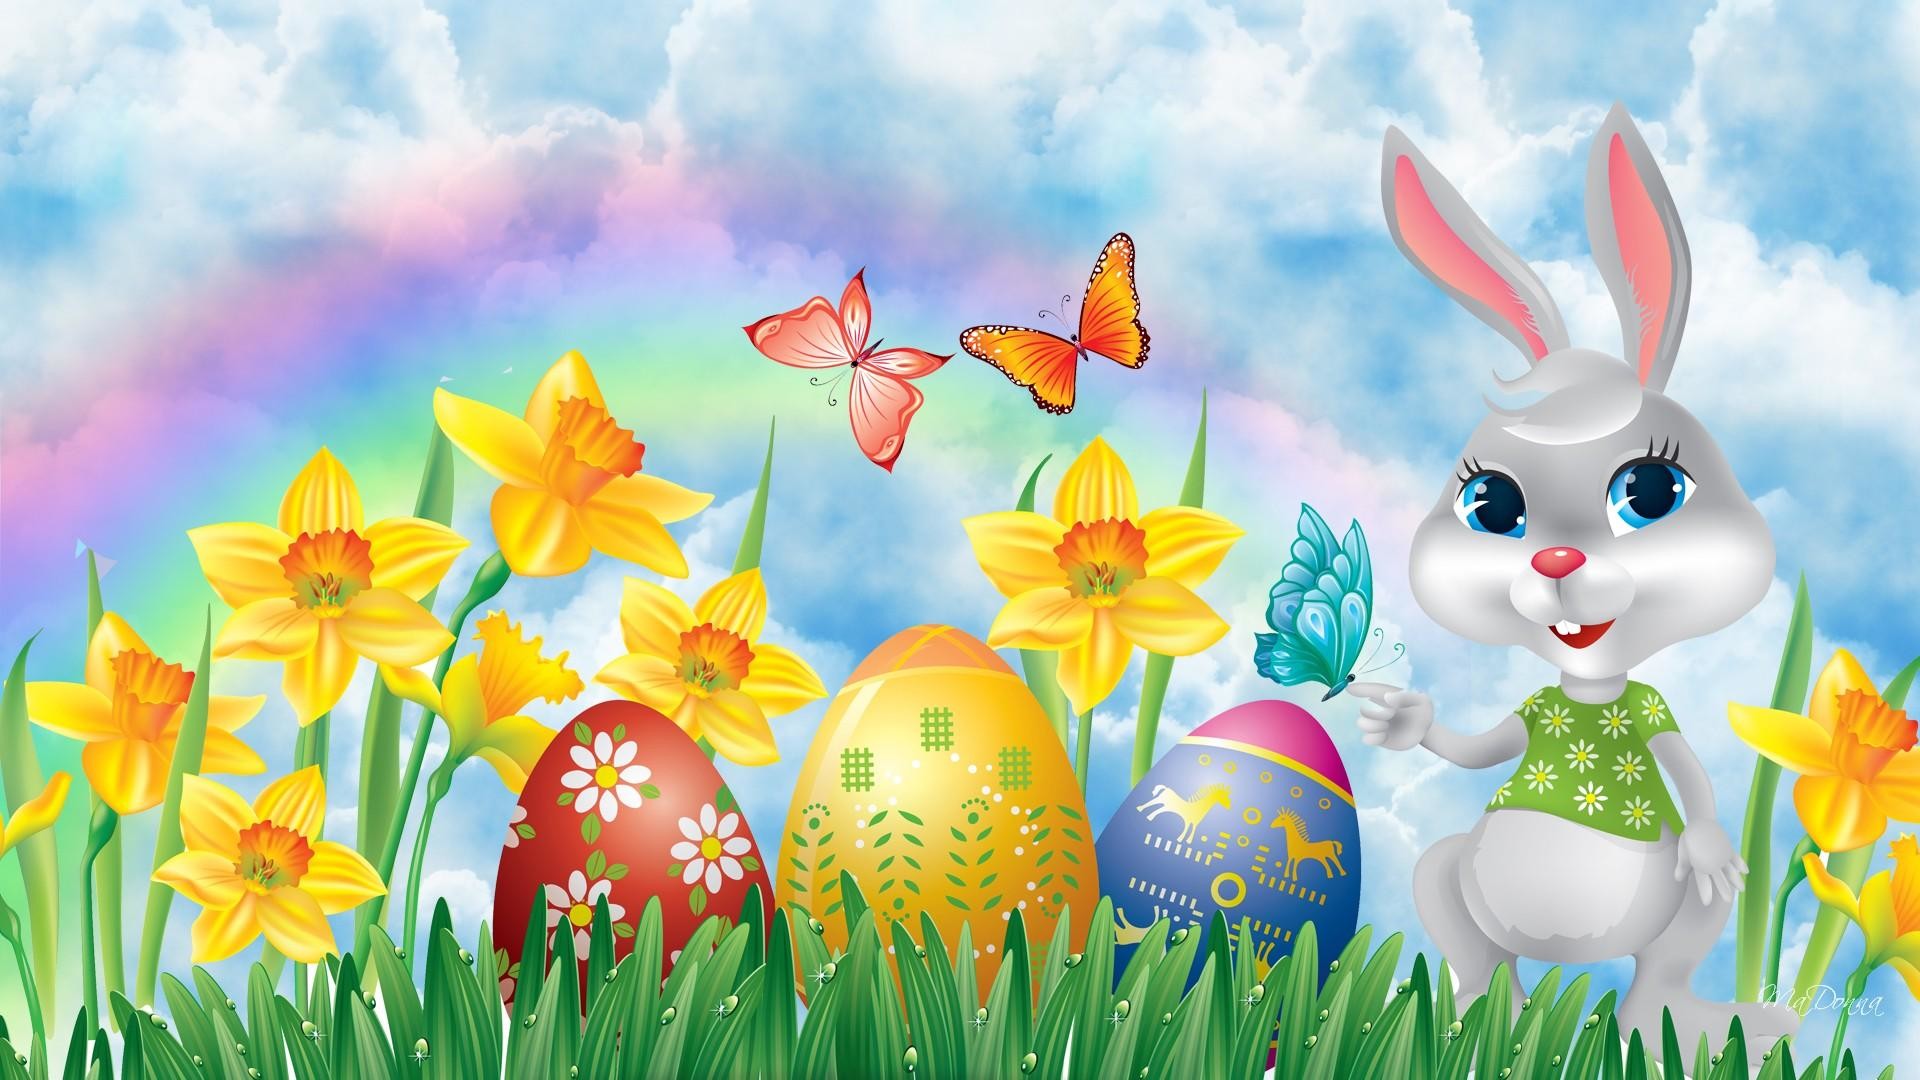 1920x1080 Holiday - Easter Holiday Bunny Flower Daffodil Egg Easter Egg Colors  Colorful Wallpaper